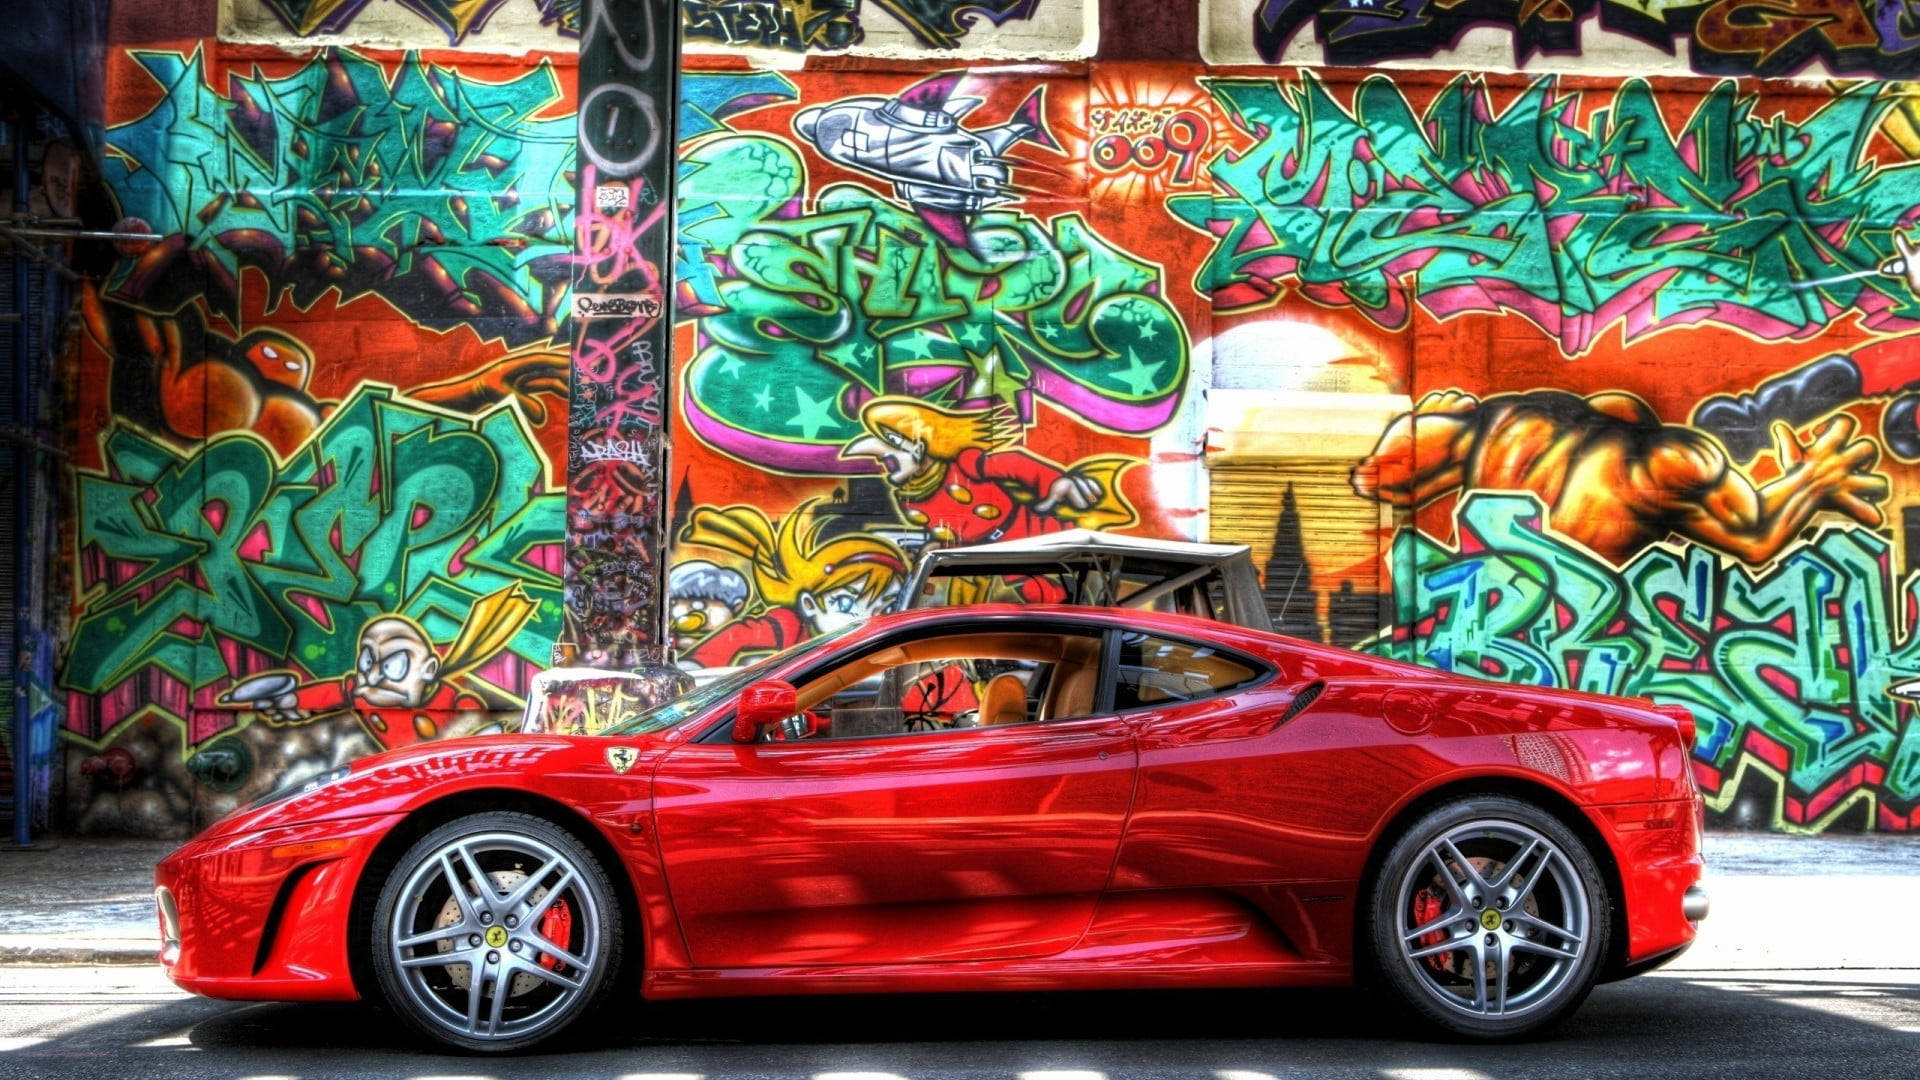 Colorful Wall And Red Ferrari Ipad Background